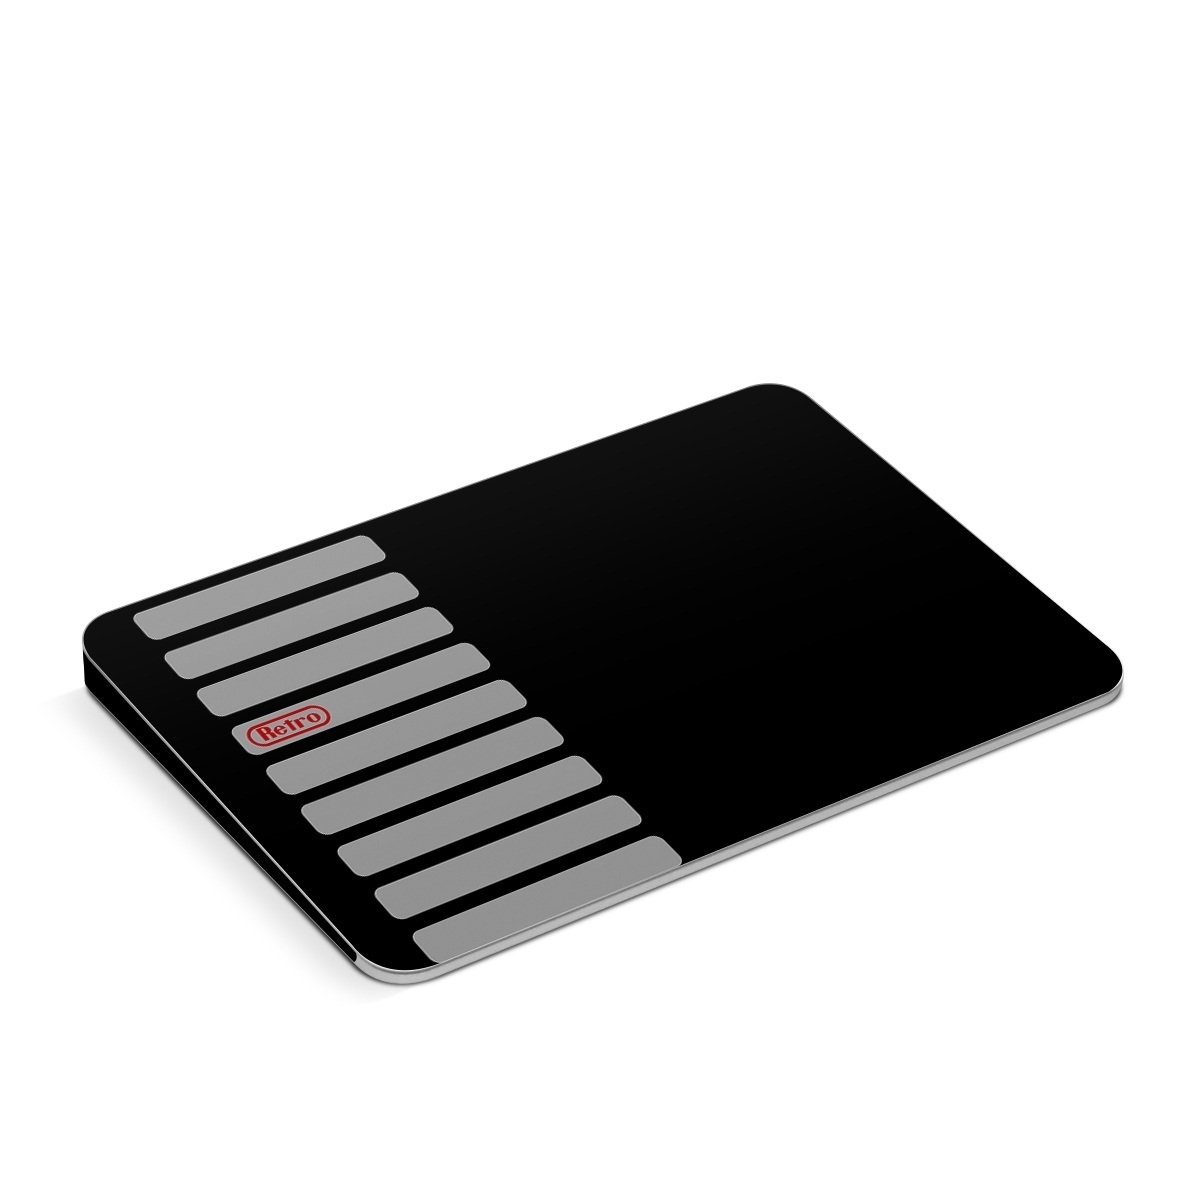 Apple Magic Trackpad Skin design of Text, Black, Font, Logo, Line, Design, Material property, Pattern, Brand, Technology, with black, gray, red colors